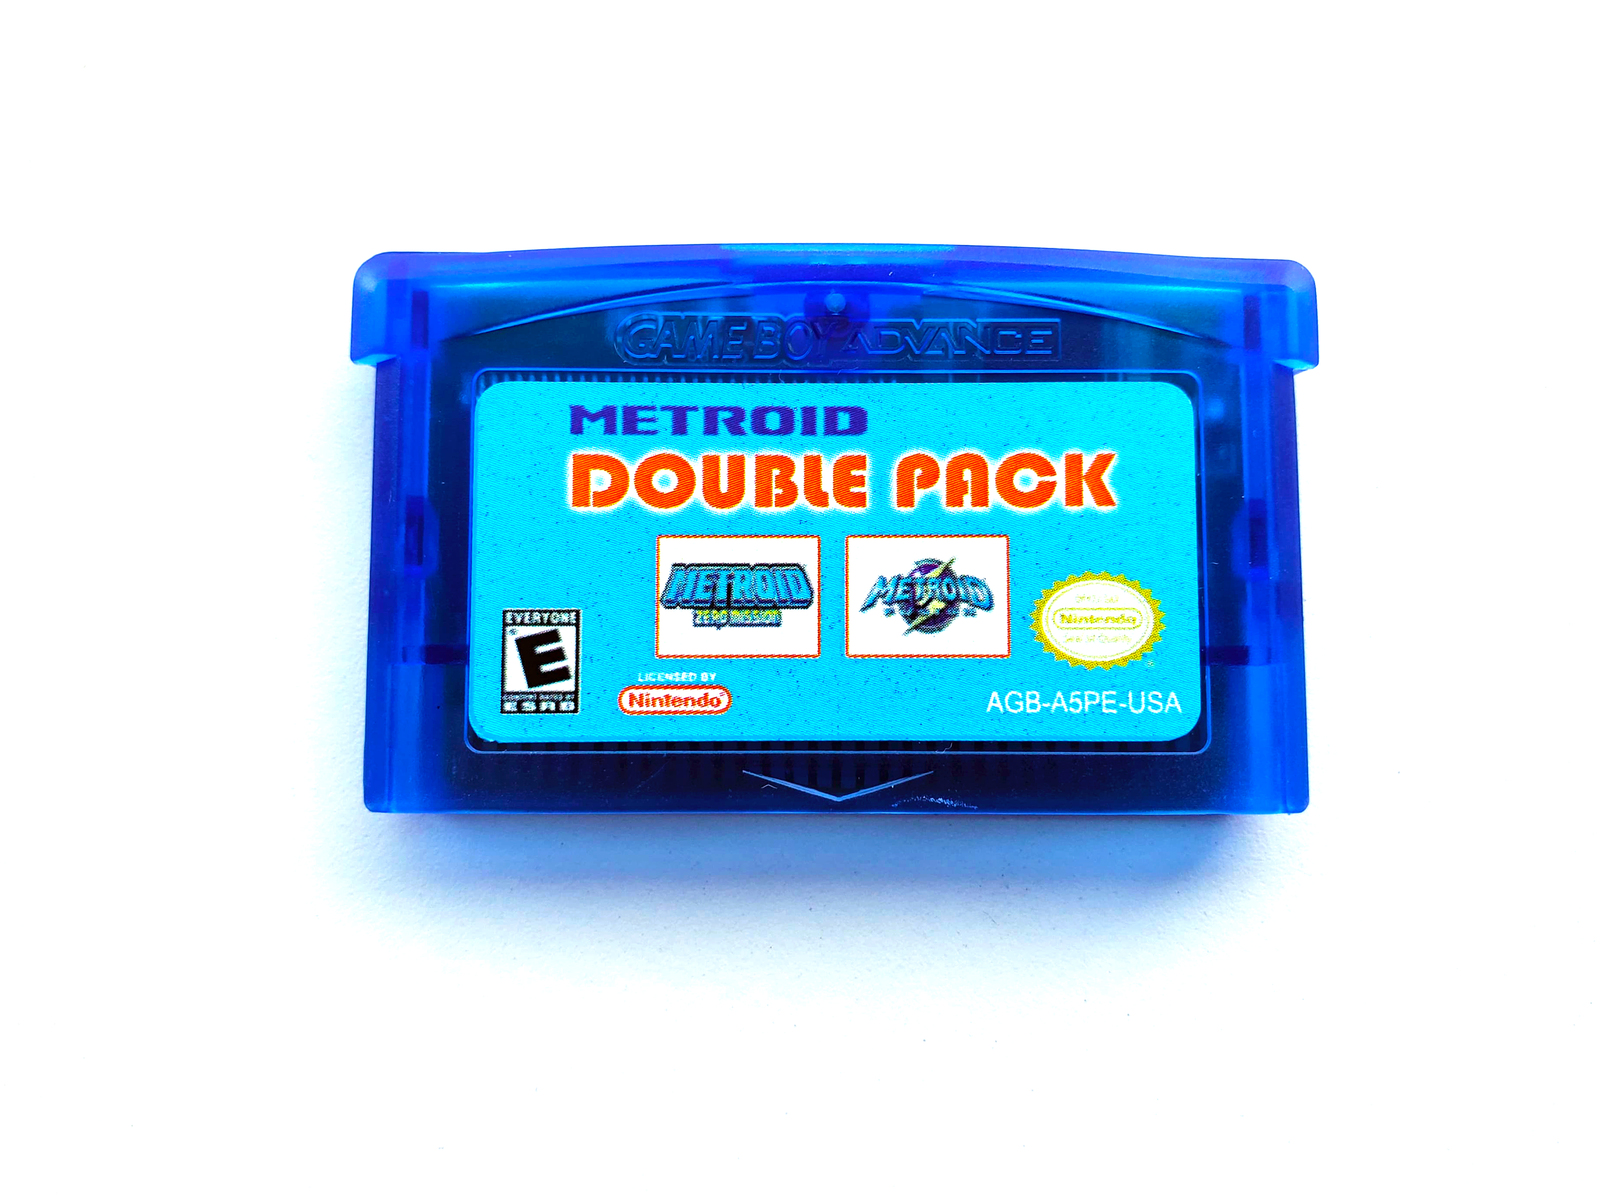 Metroid Fusion & Zero Mission - Double Pack 2 in 1 - GBA Gameboy Advance Custom